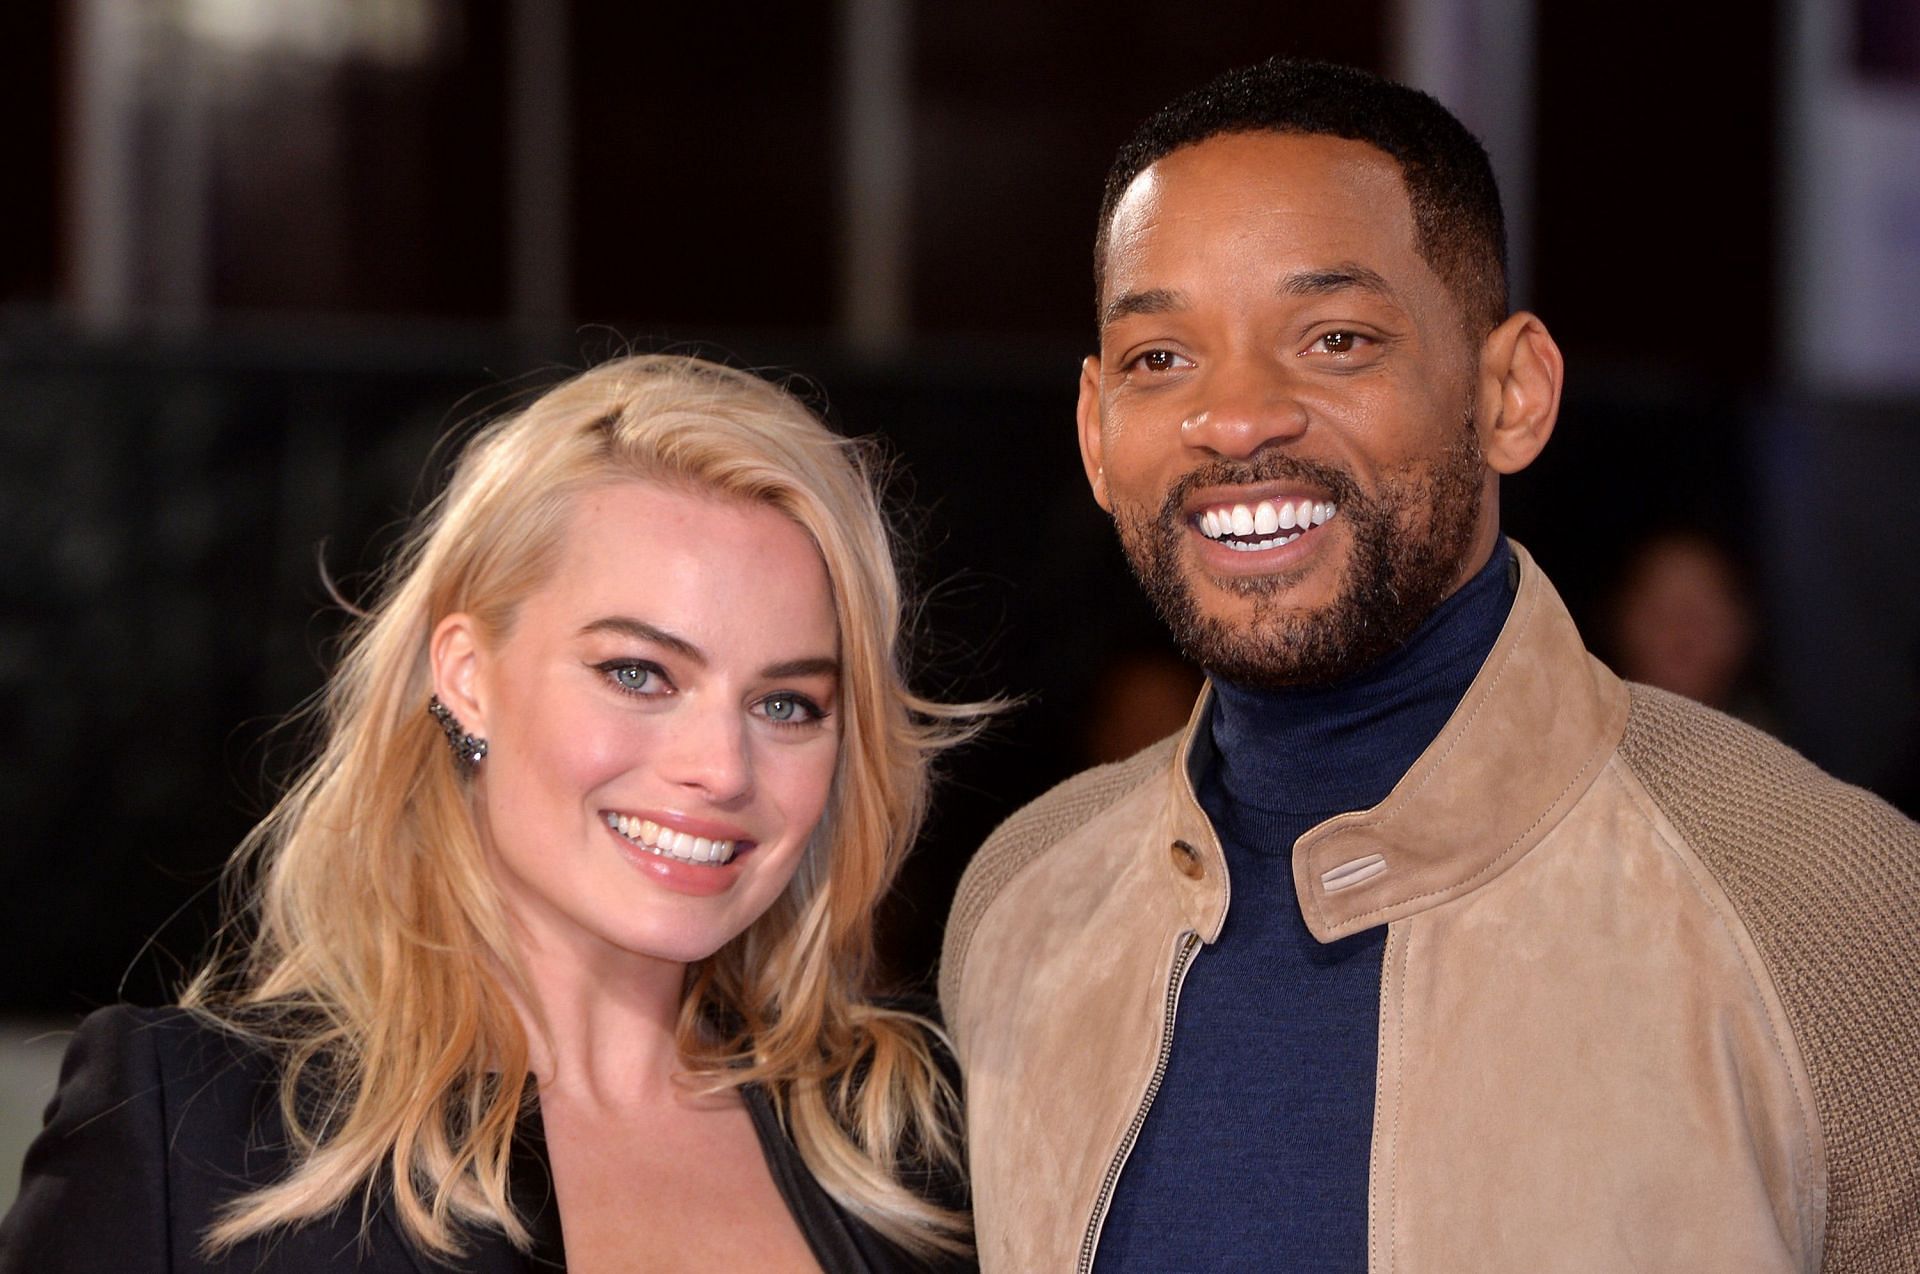 Will Smith and Margot Robbie bus video leaves netizens enraged (Image via Getty Images)